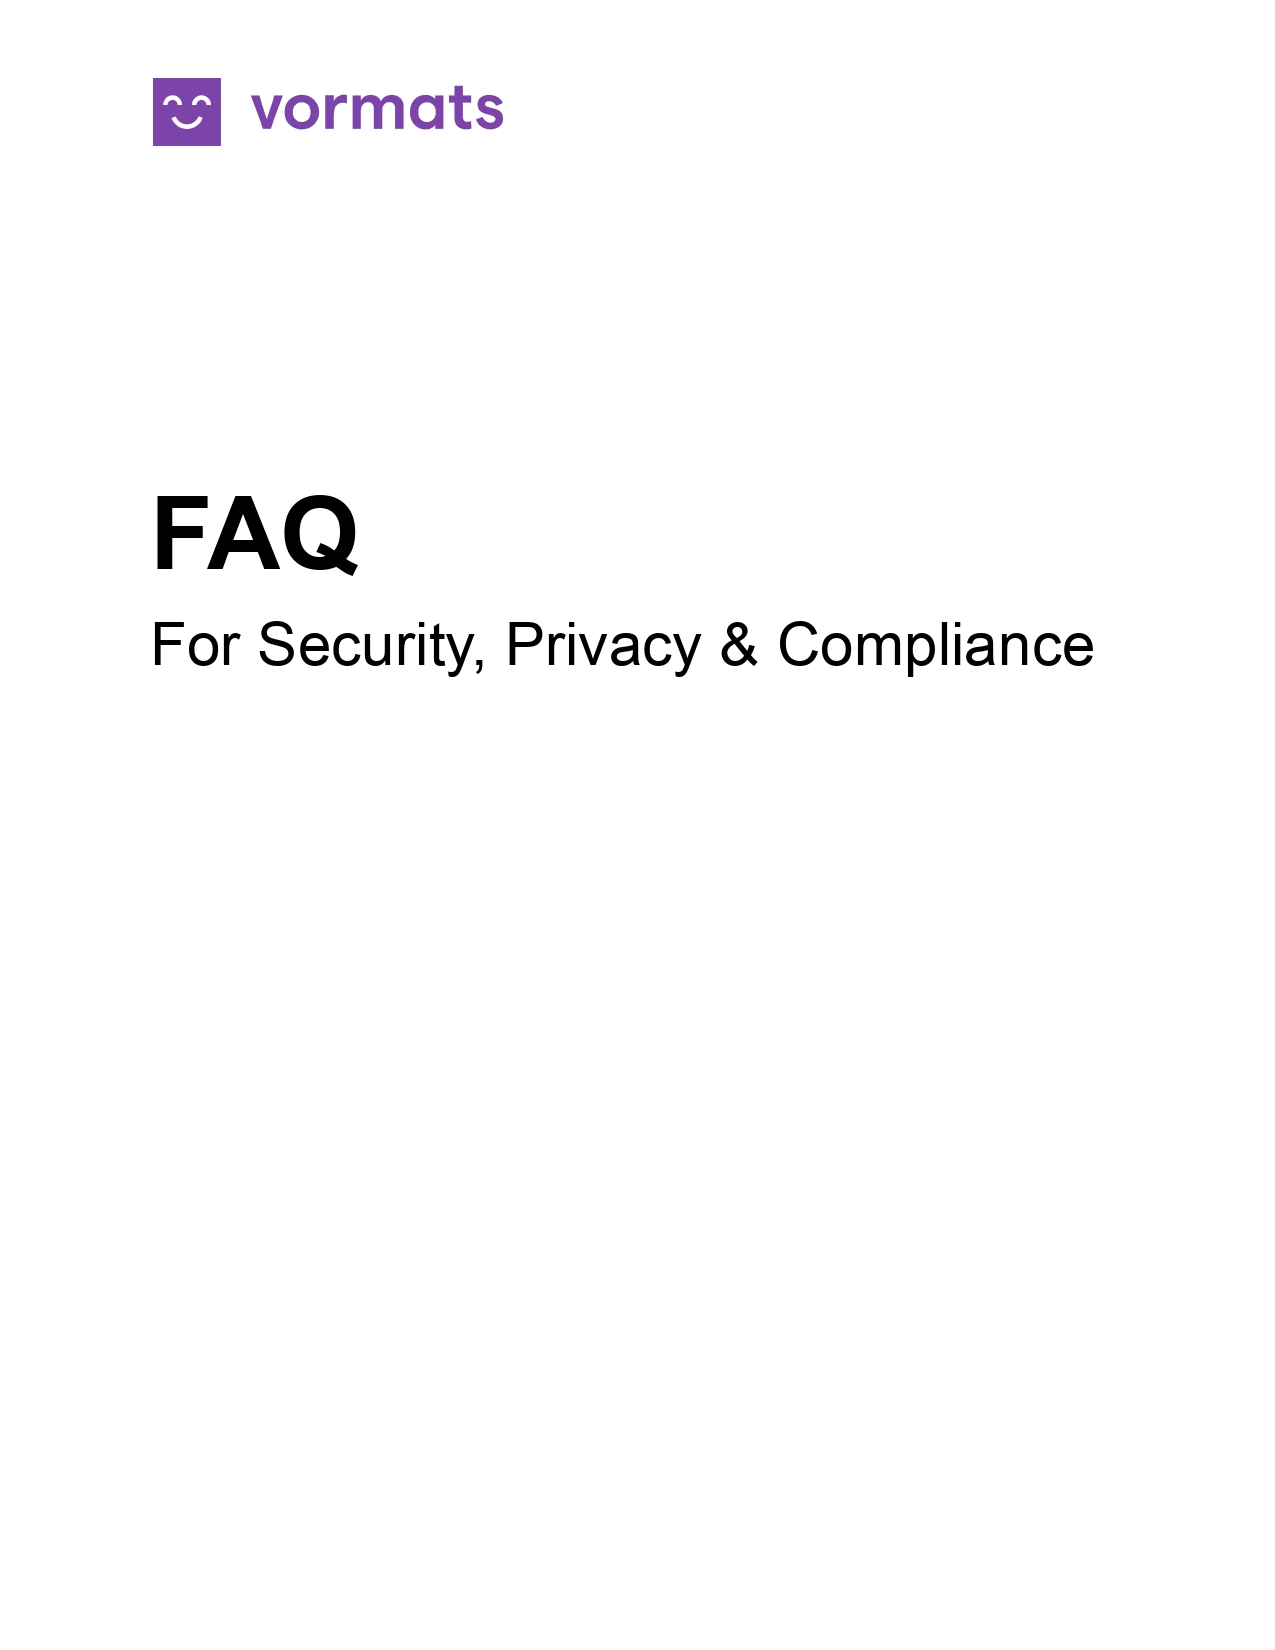 FAQ Security, Privacy & Compliance_pages-to-jpg-0001